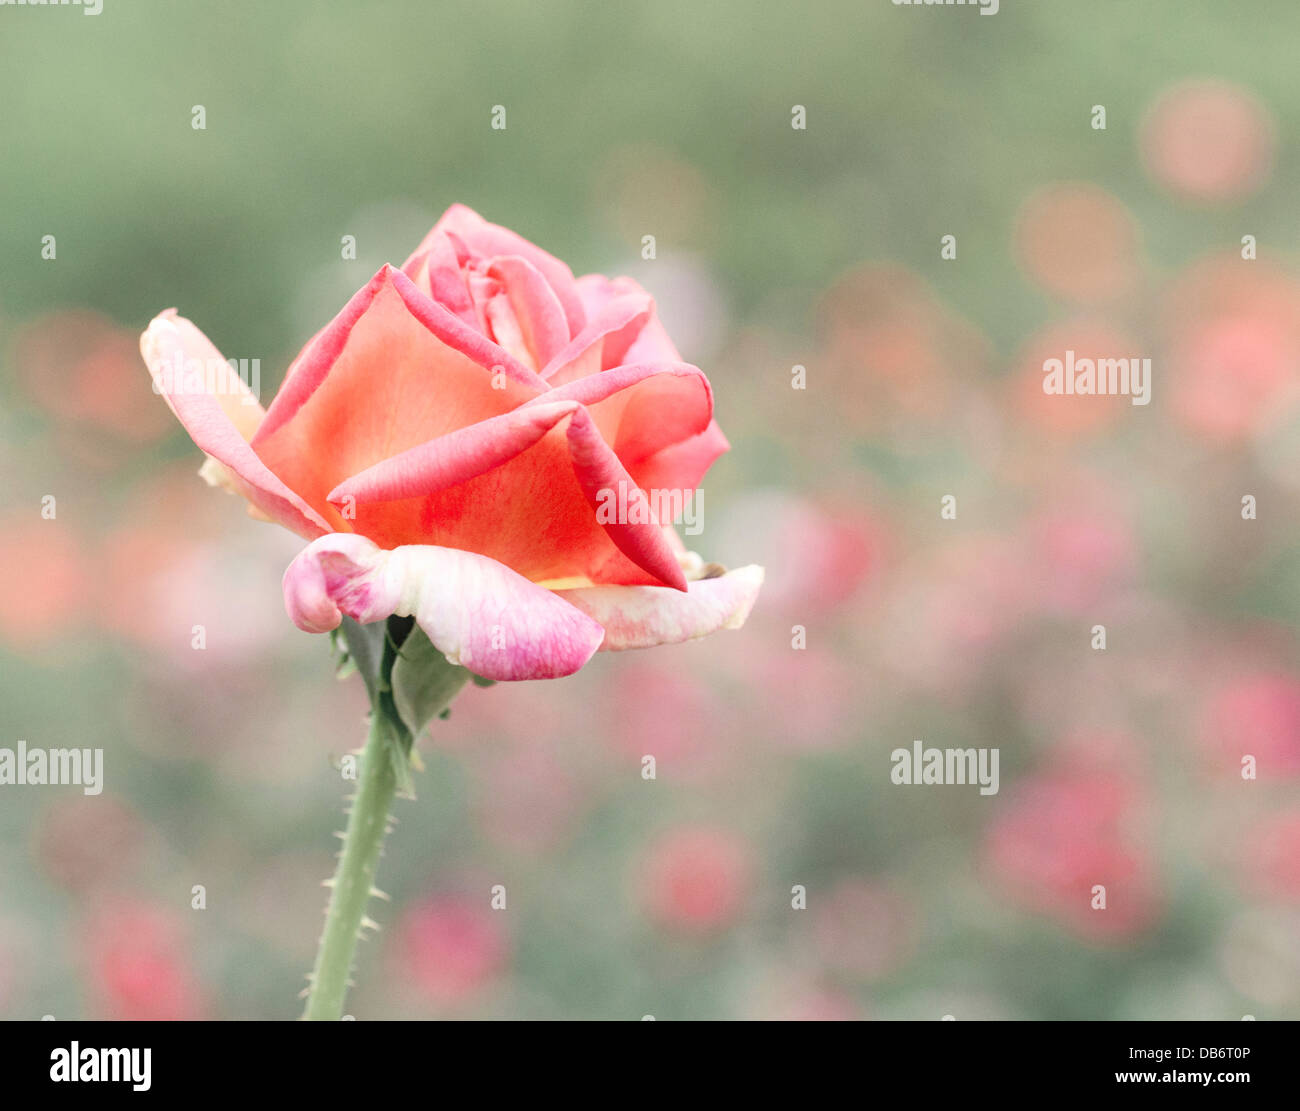 Vibrant pink rose blooming against a colorful bokeh background Stock Photo